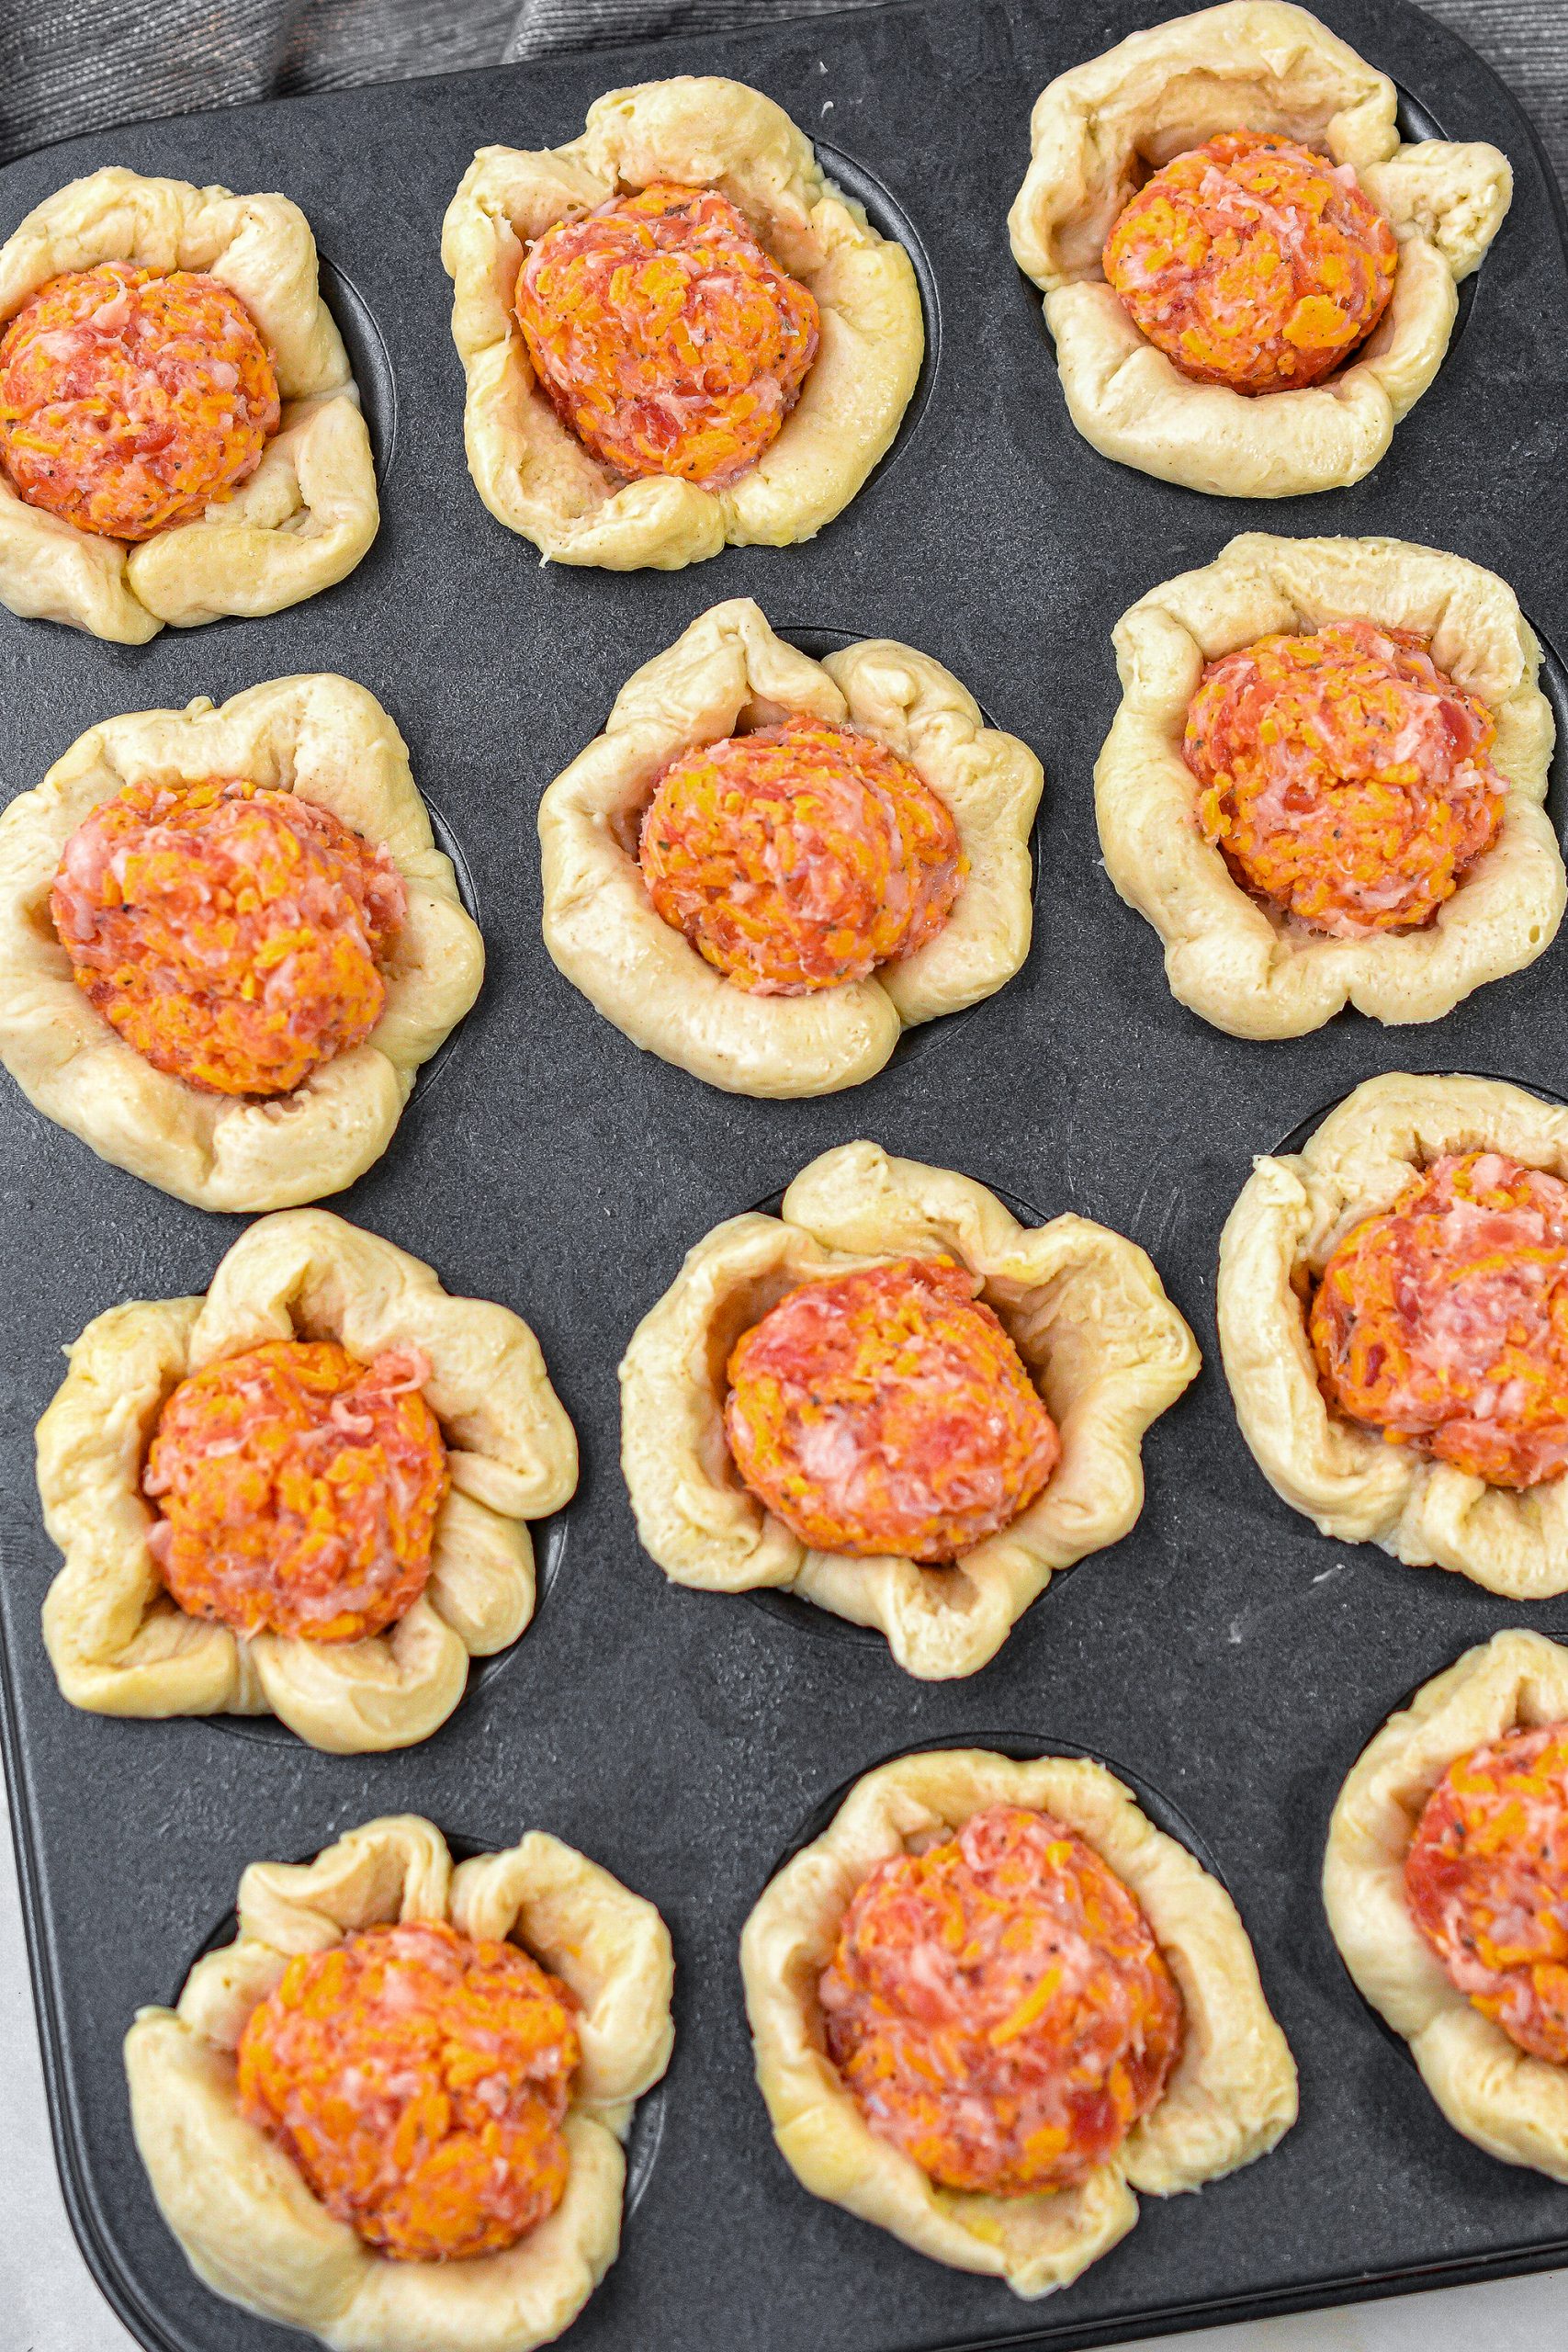 Press a ball of sausage into the center of each dough cup in the mini muffin tins.